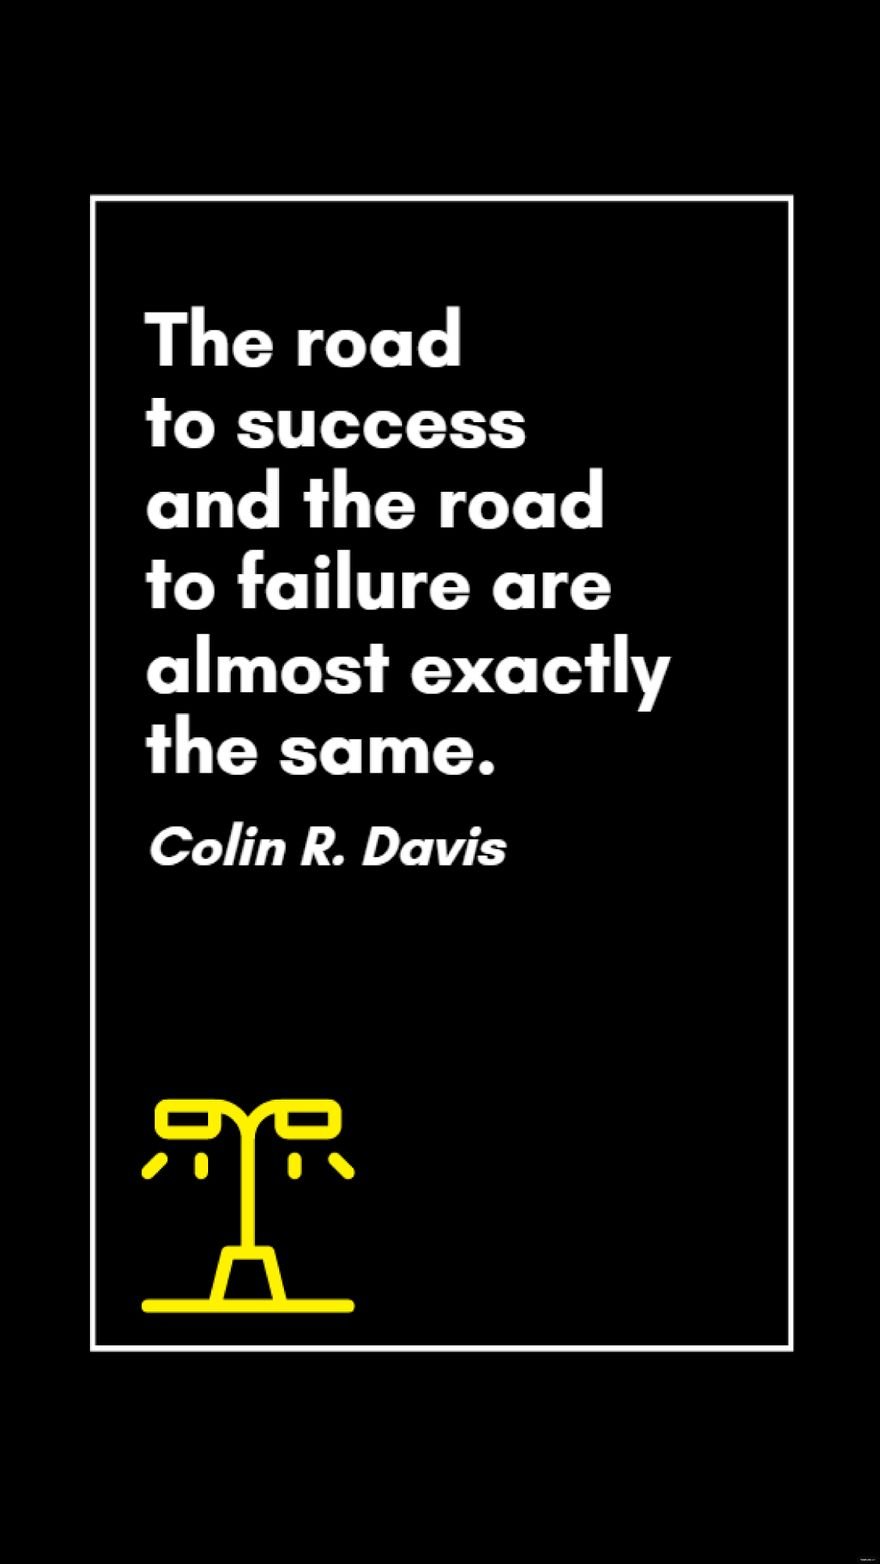 Free Colin R. Davis - The road to success and the road to failure are almost exactly the same.